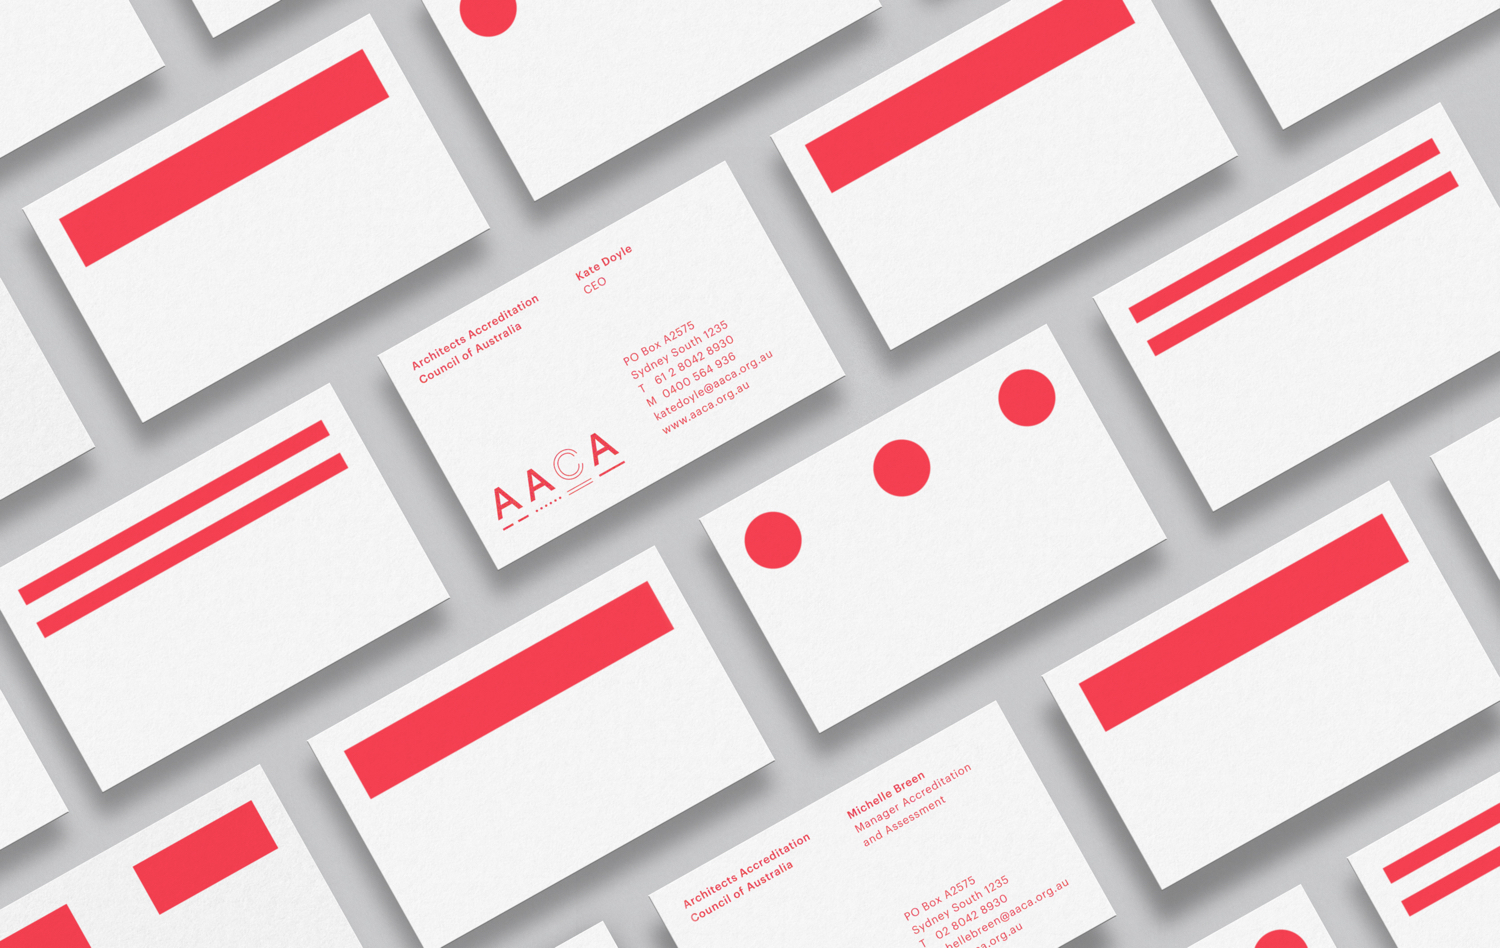 Minimal Design & Branding – Architects Accreditation Council of Australia by Toko